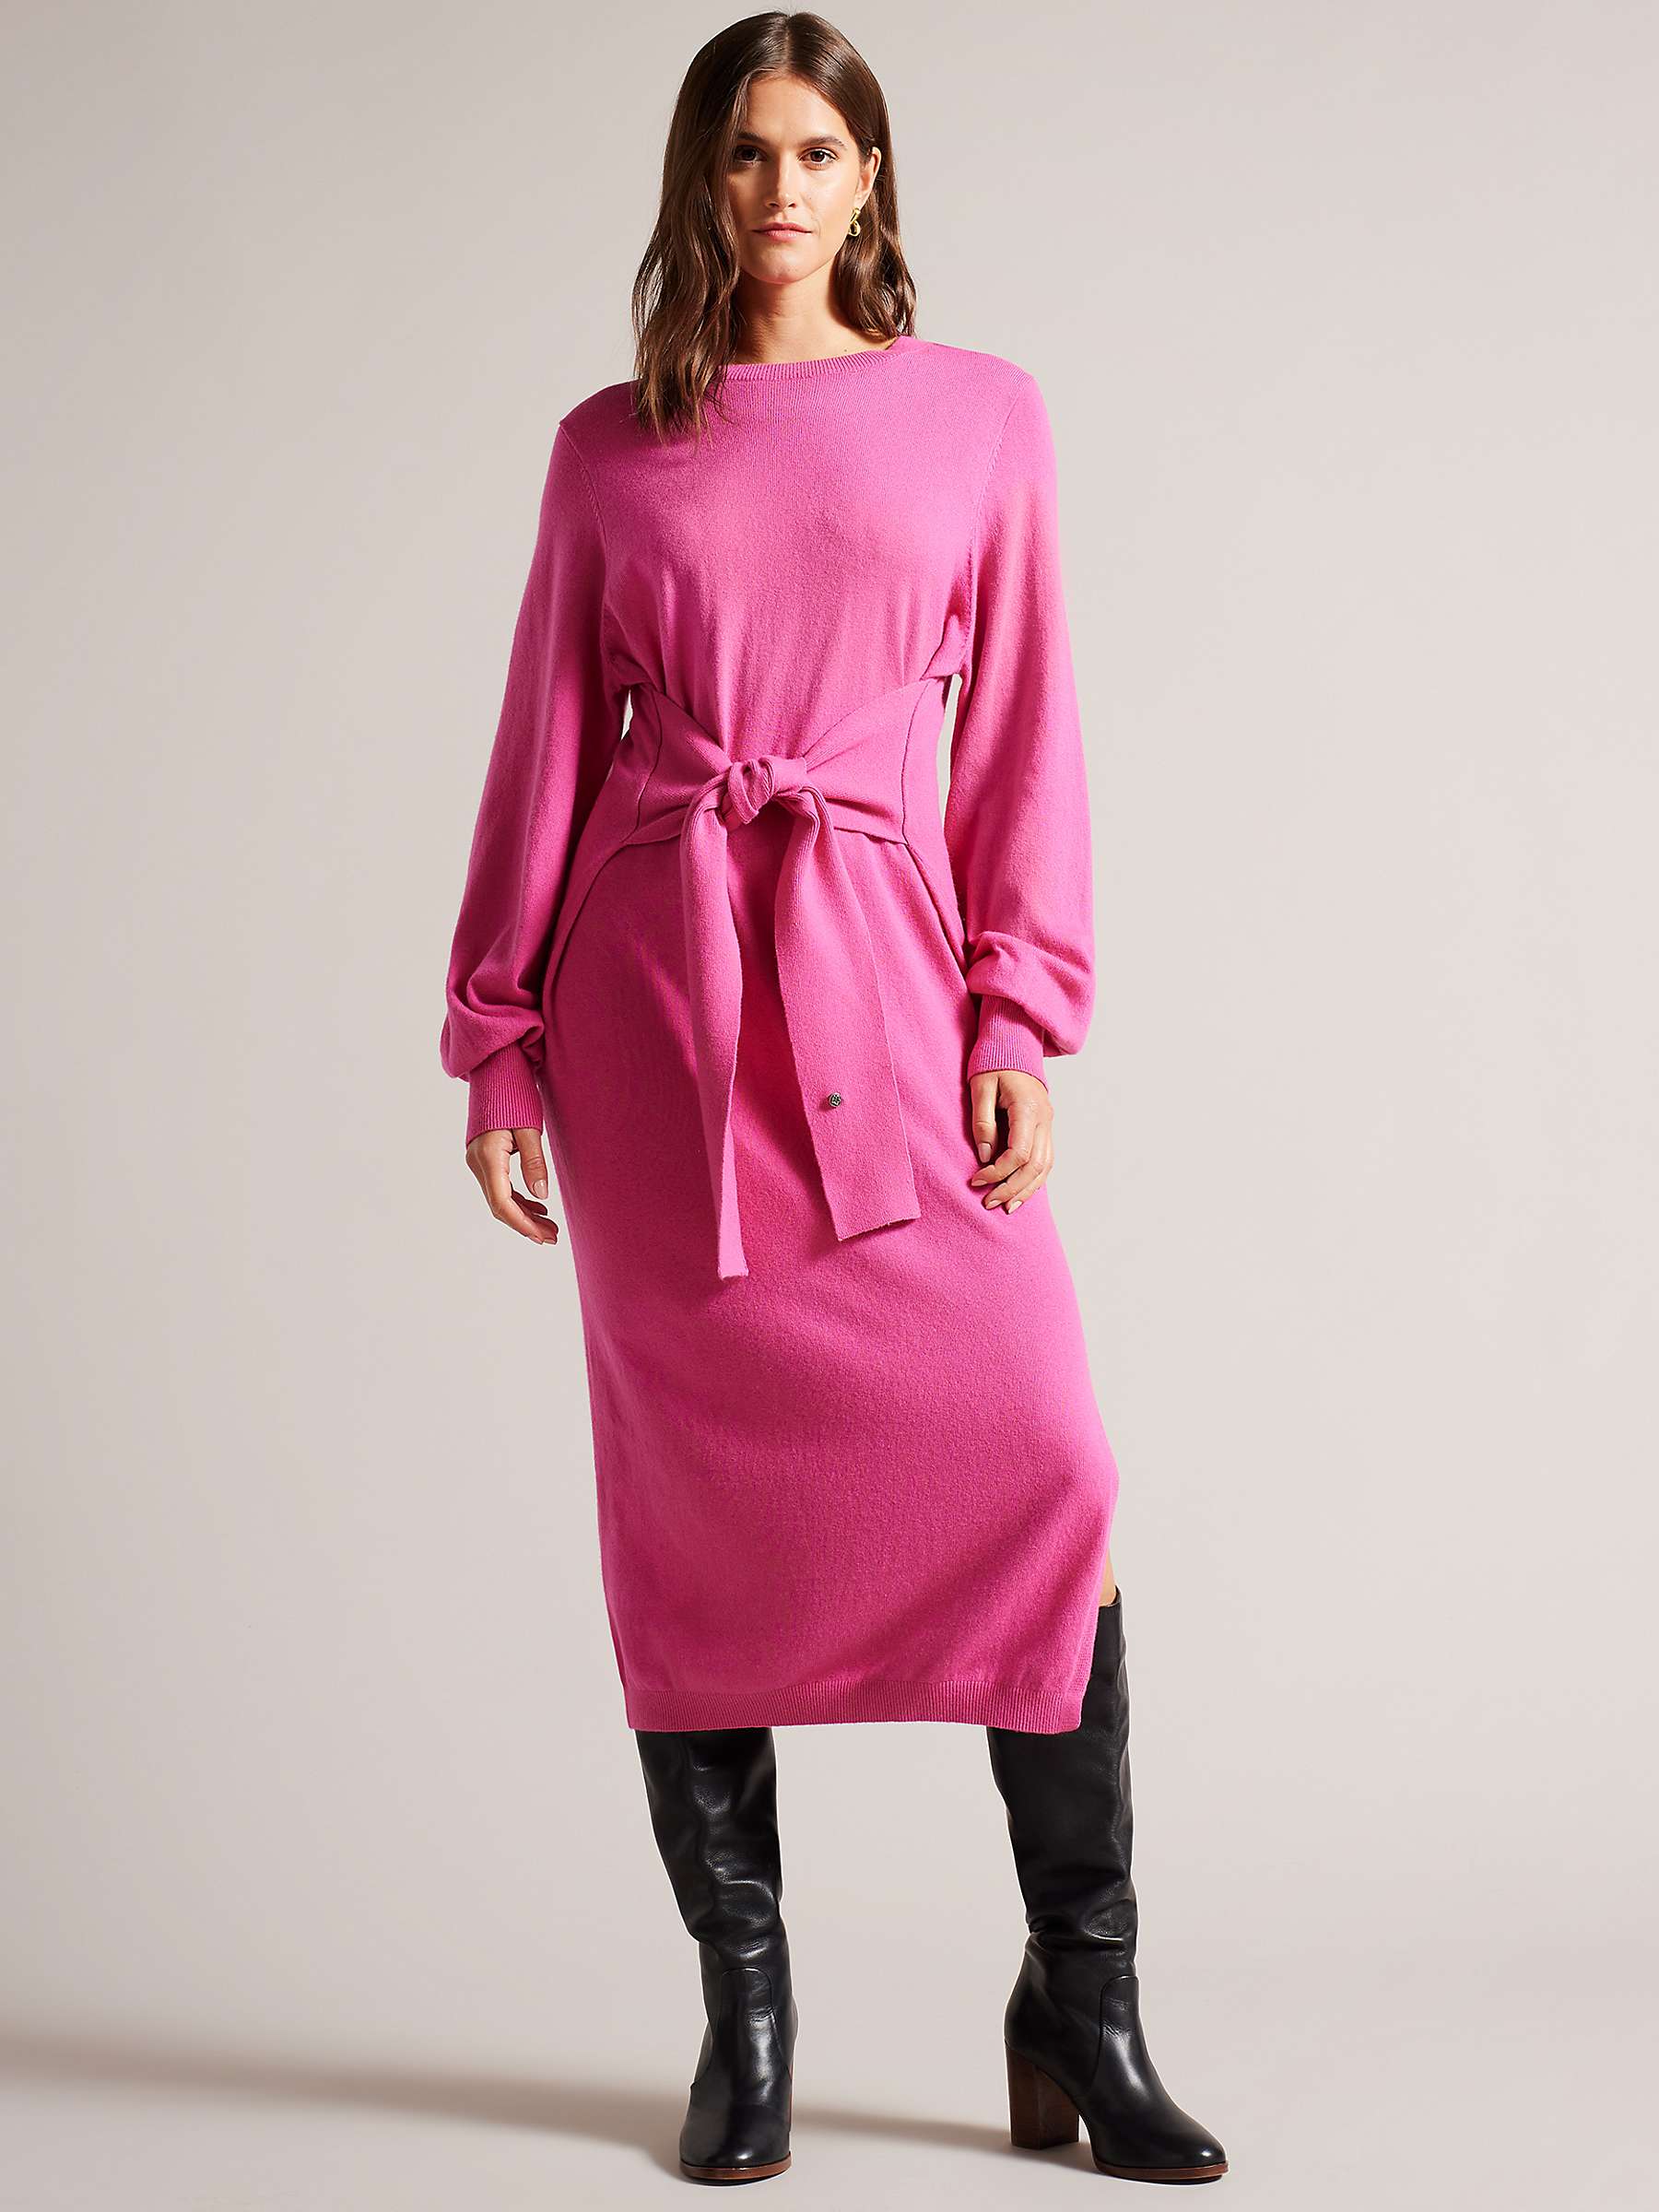 Buy Ted Baker Essya Slouchy Tie Front Knit Midi Dress Online at johnlewis.com